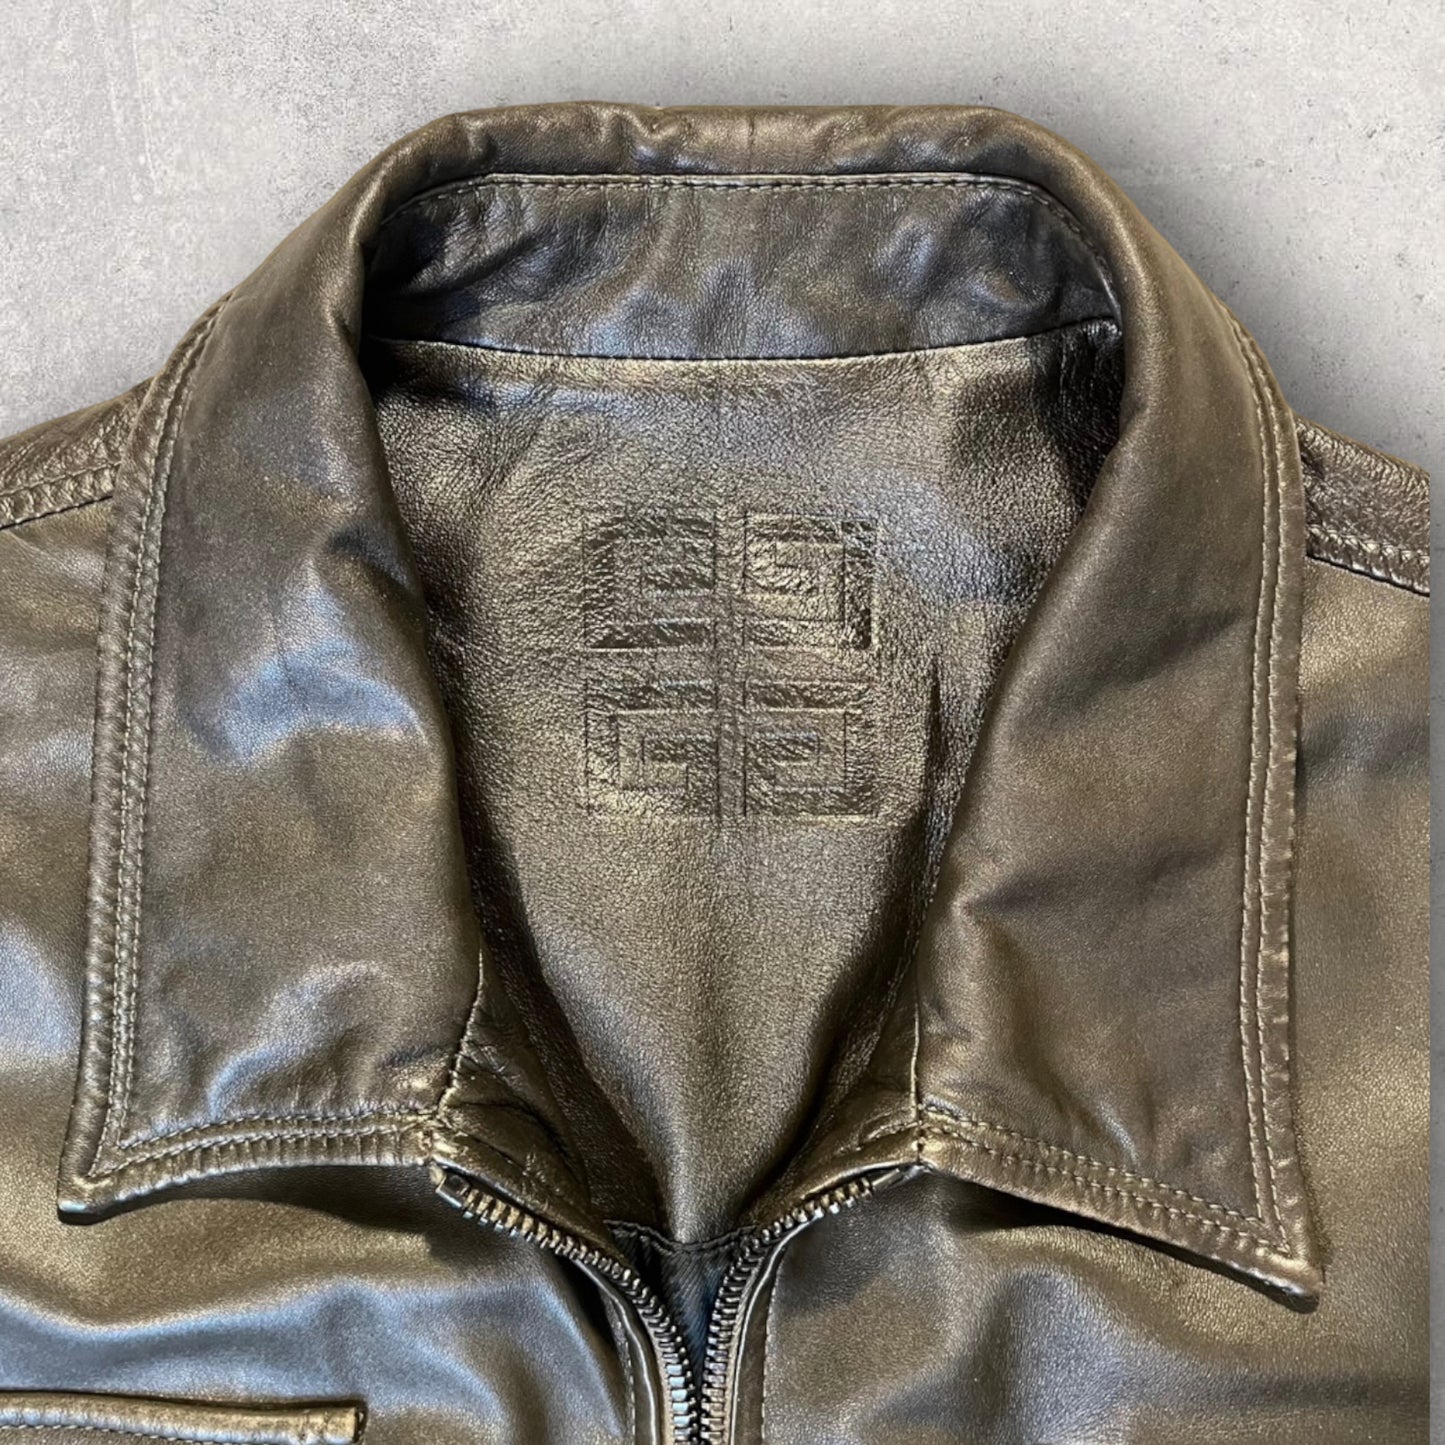 Mid 00s Givenchy Light Leather Jacket by Ozwald Boateng (M)